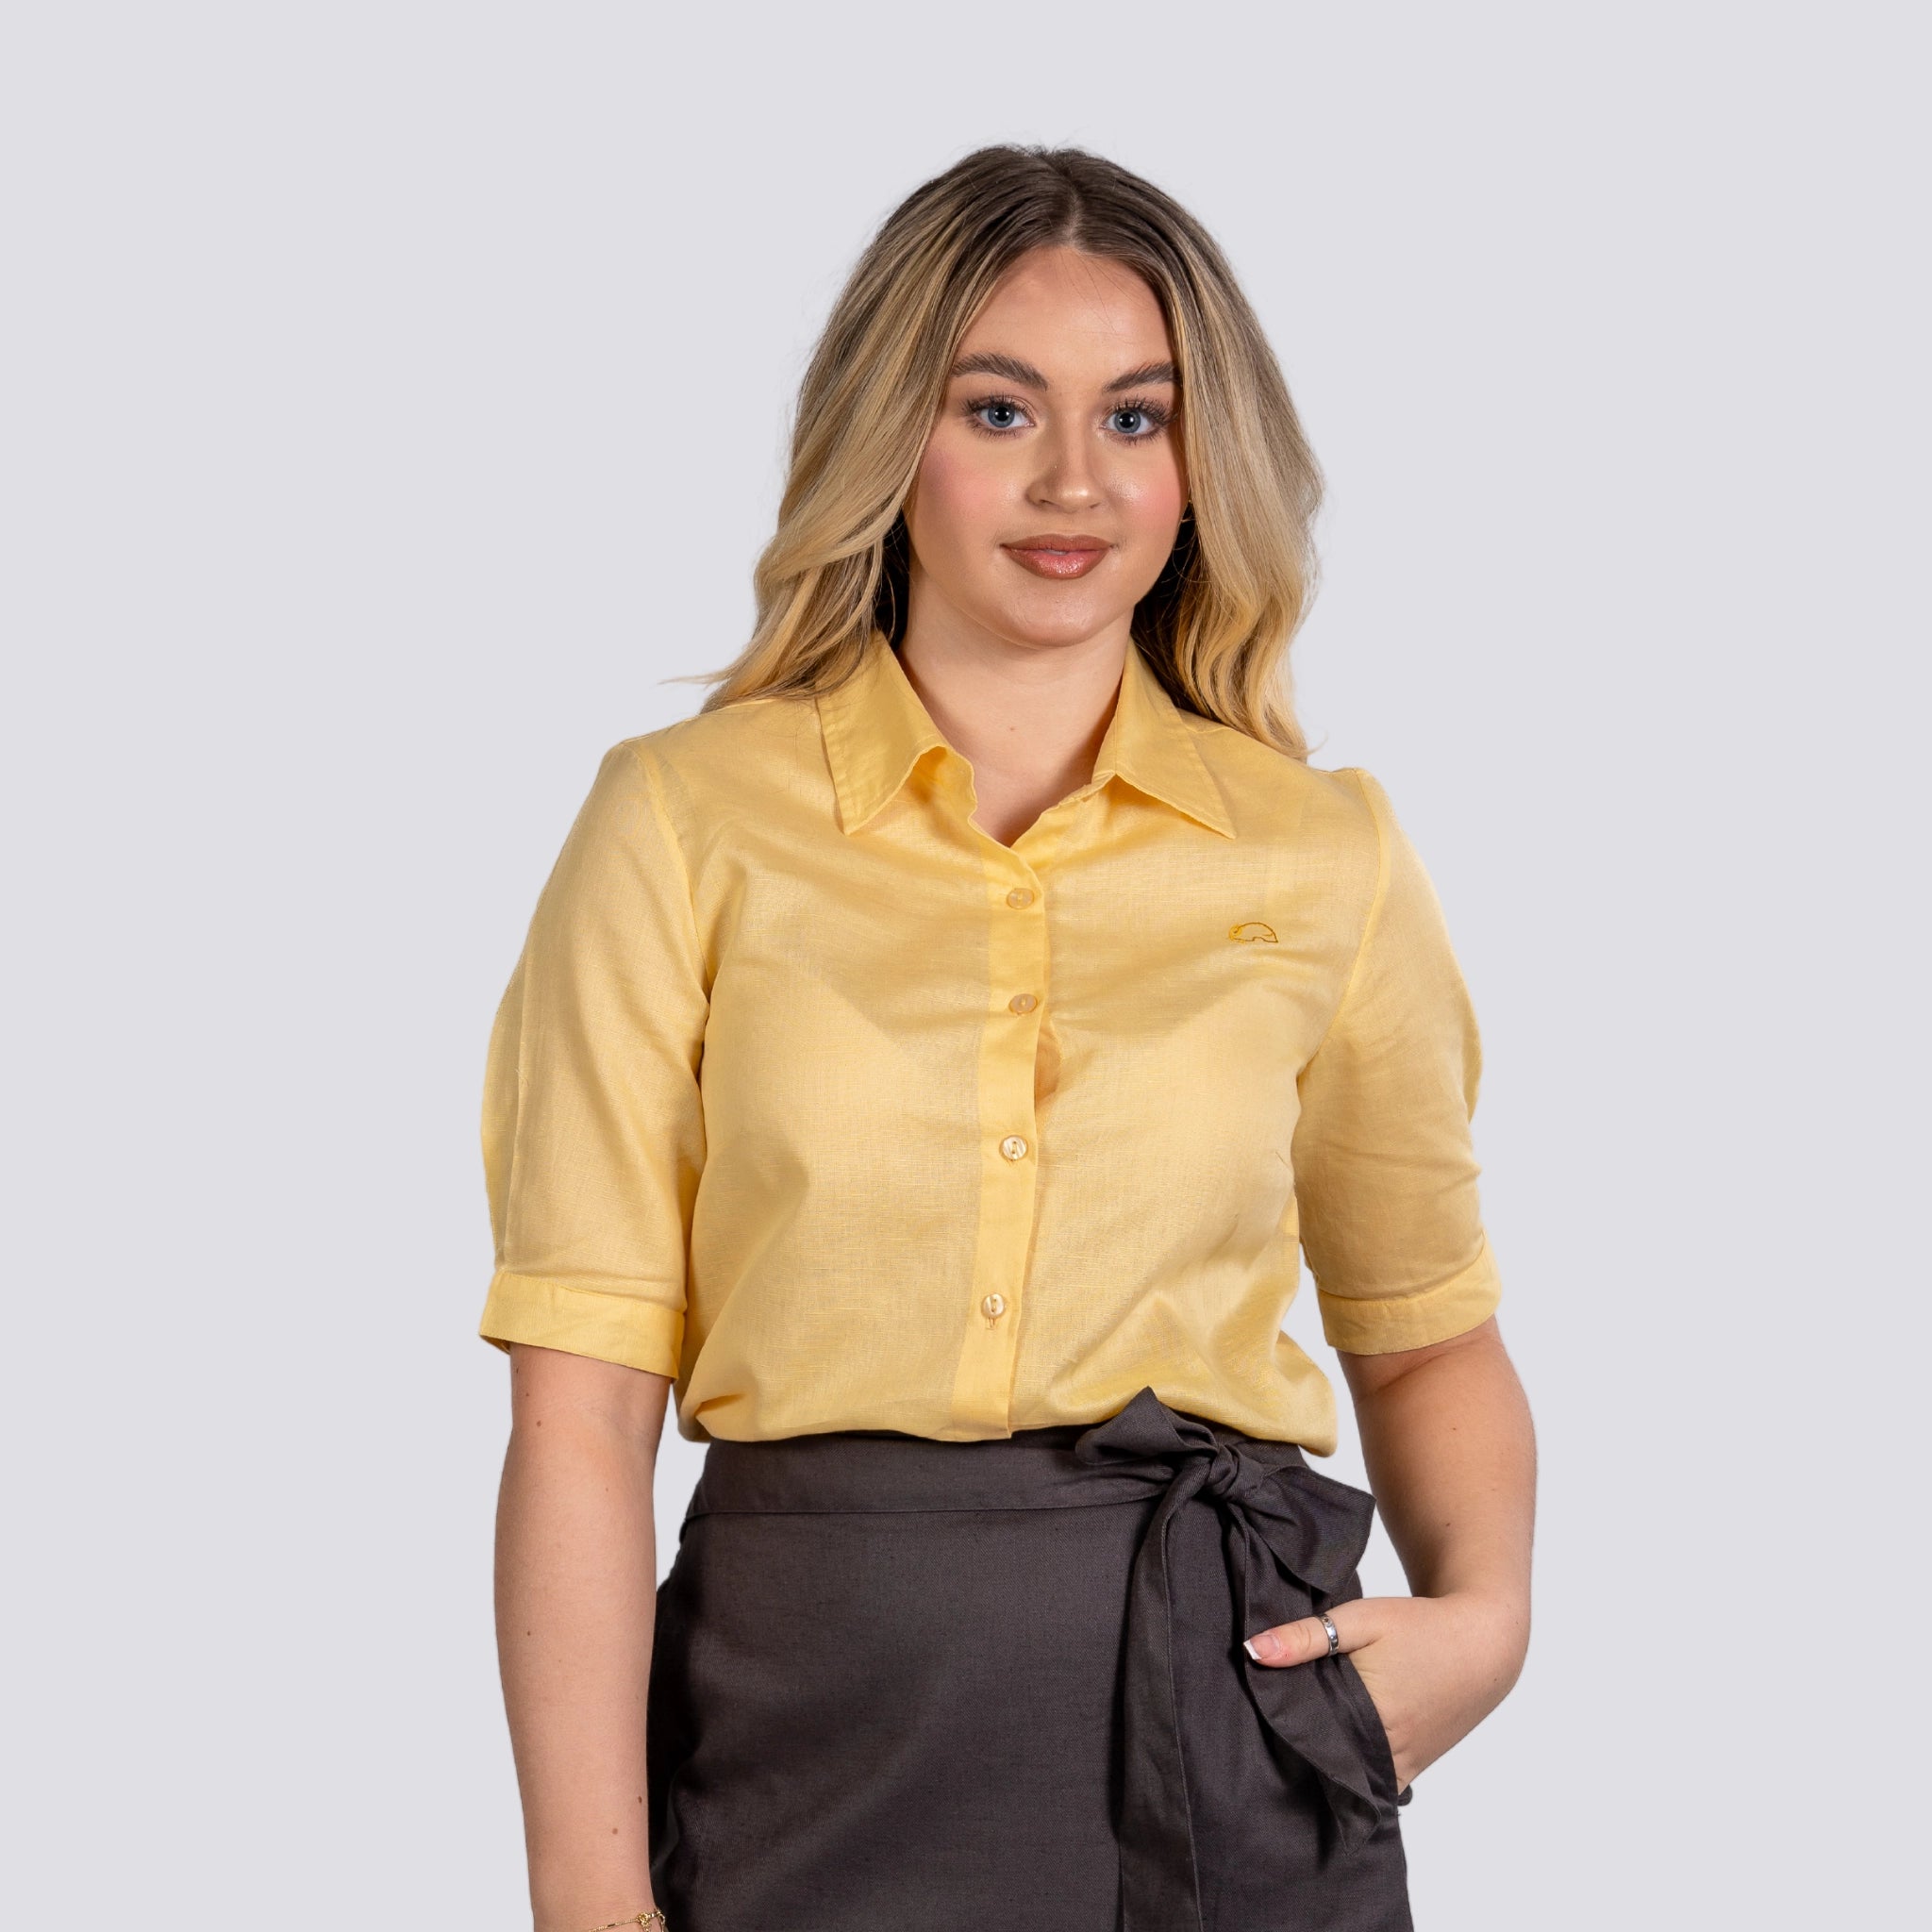 A young woman wearing a Karee Sunlit Breeze Yellow Linen Cotton Shirt For Women and brown skirt, standing with her hand on her hip, against a light gray background.